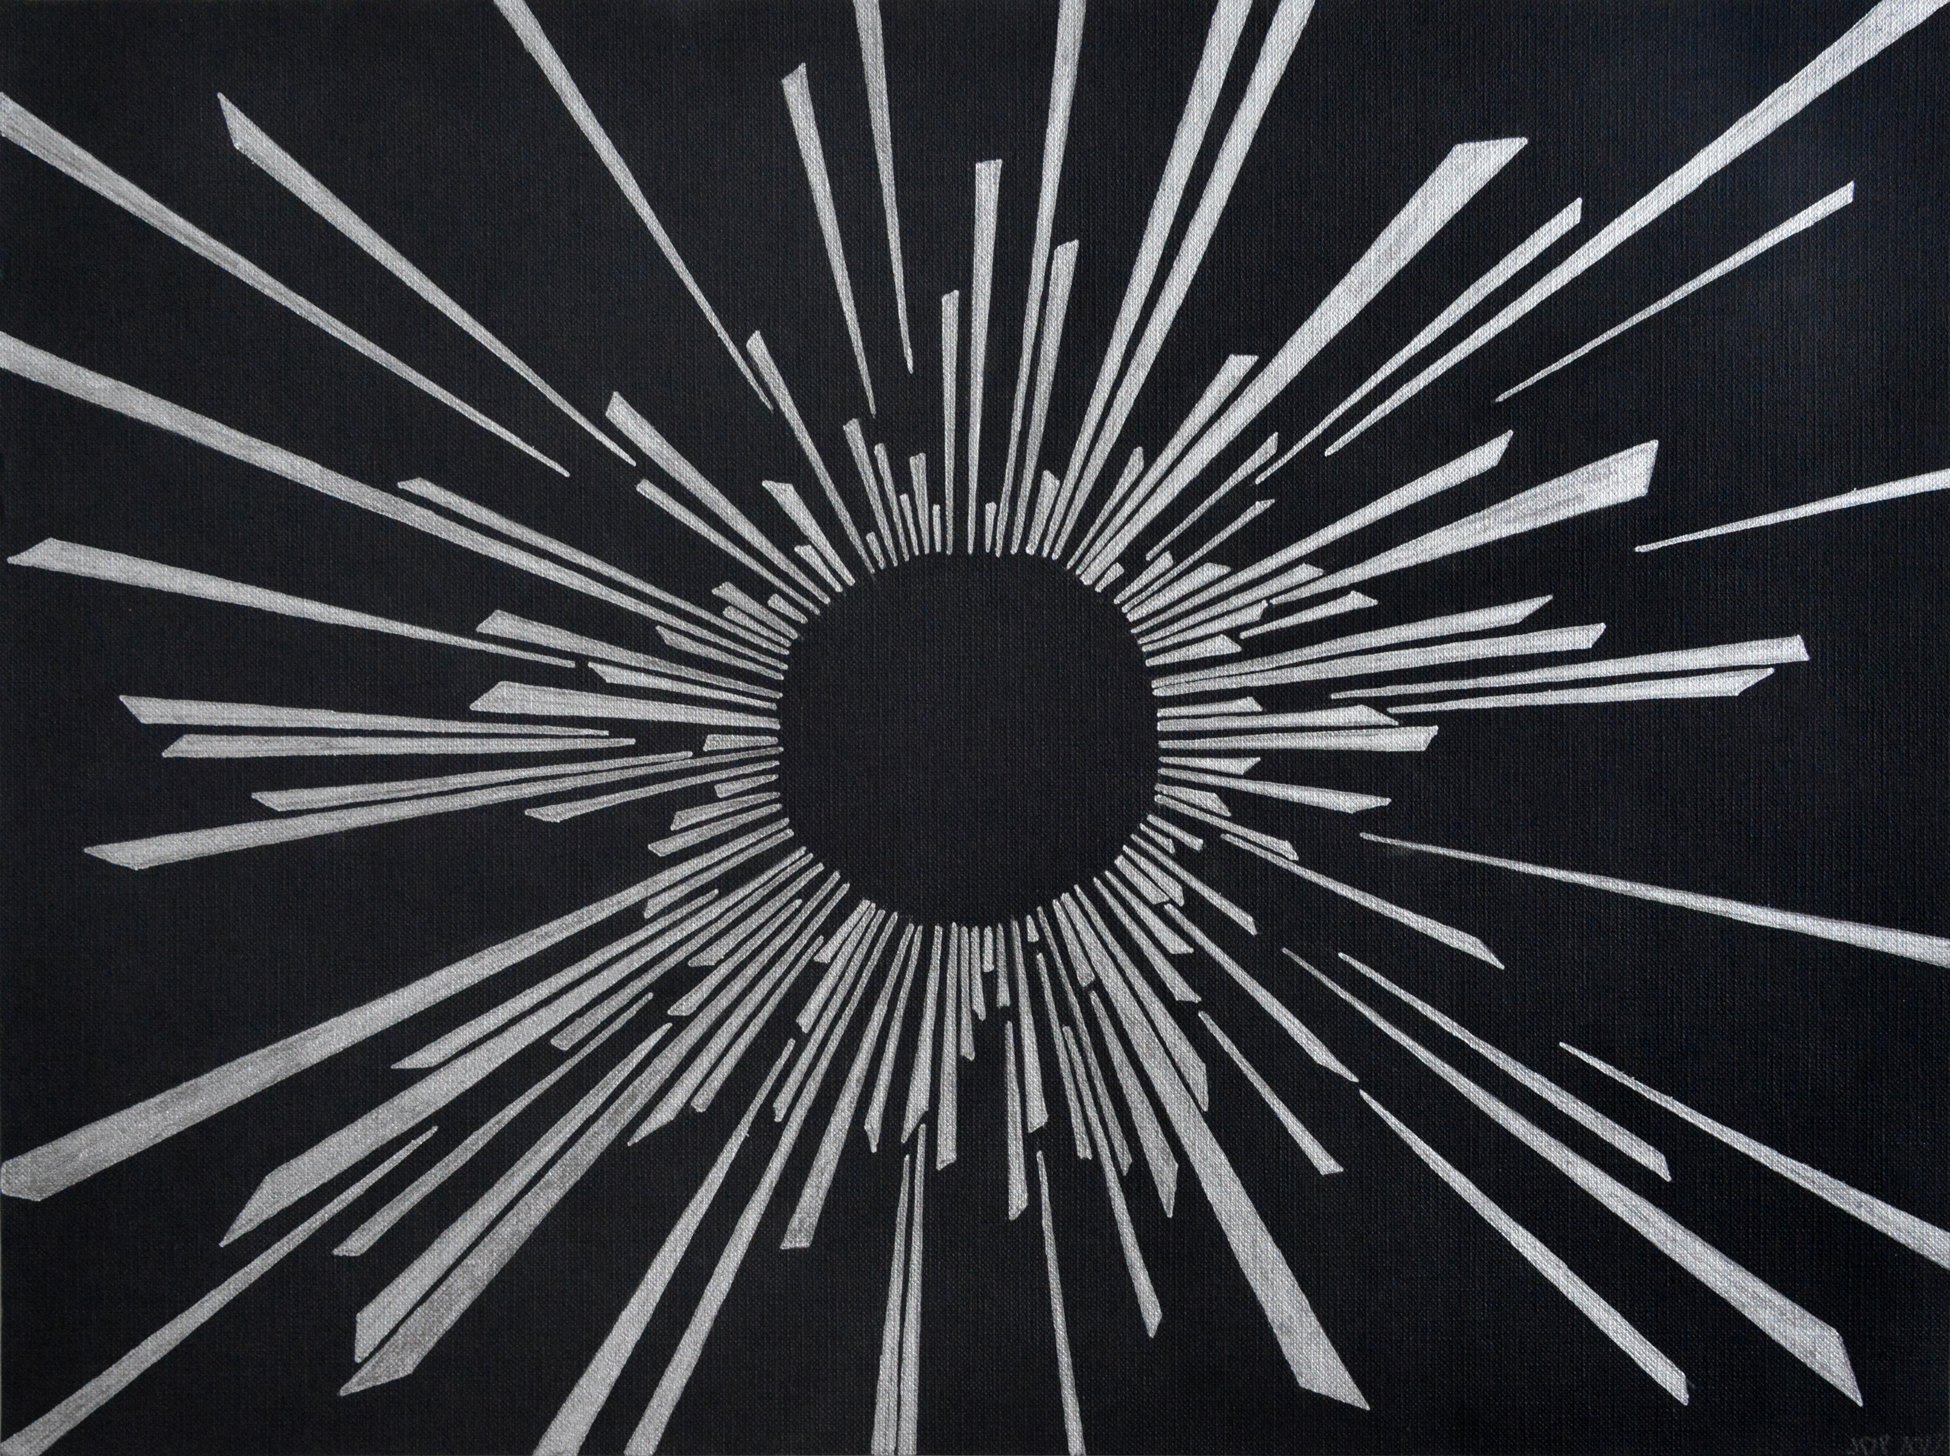 Burst 2, 2022, Metallic ink on black paper, 12 inches x 16 inches, $350